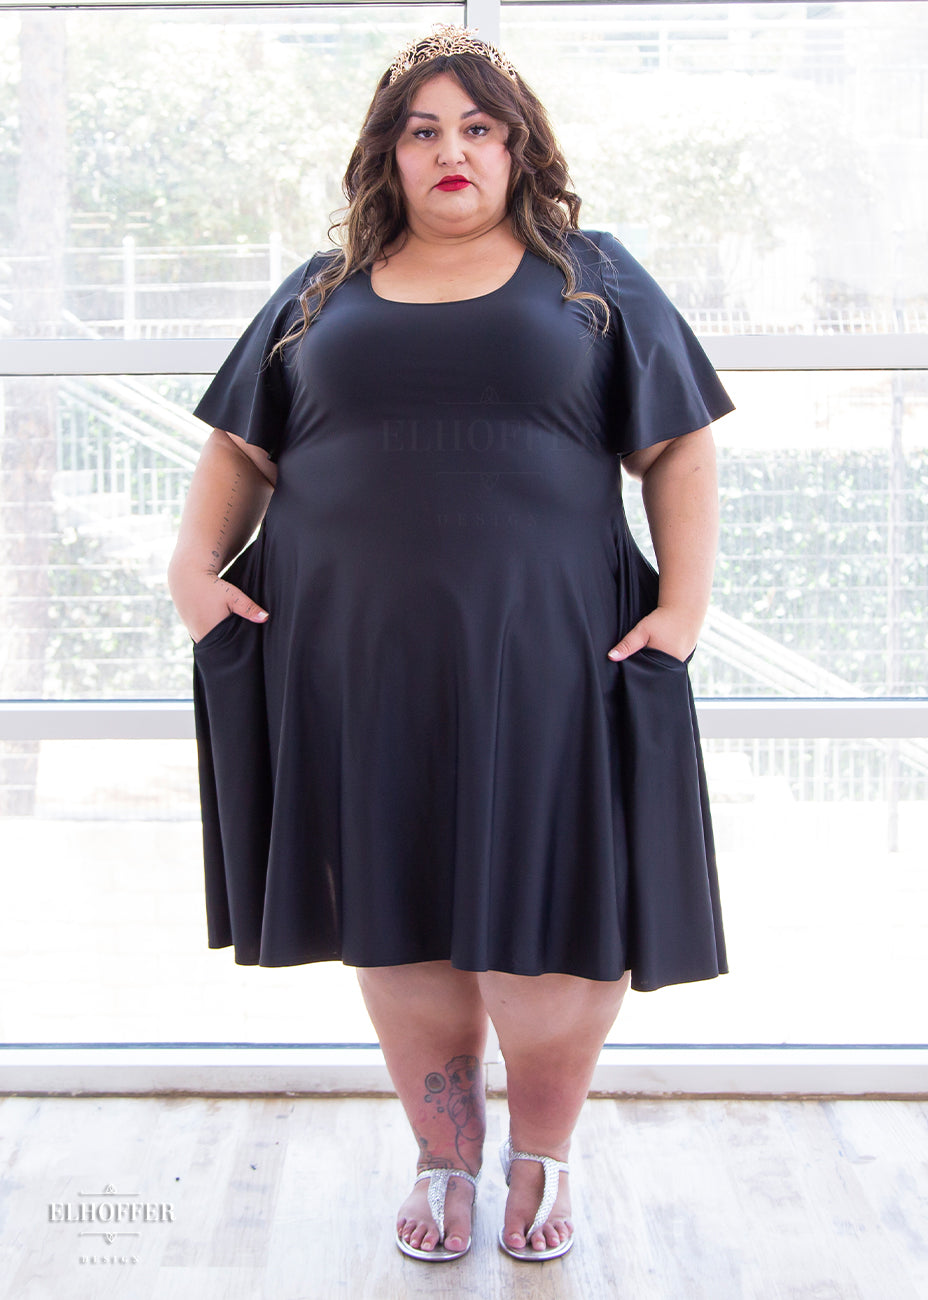 Kristen, a size 3XL olive skinned model with long brown highlighted hair, is wearing a knee-length pullover dress with scoop neck, flutter sleeves, and side pockets in black.